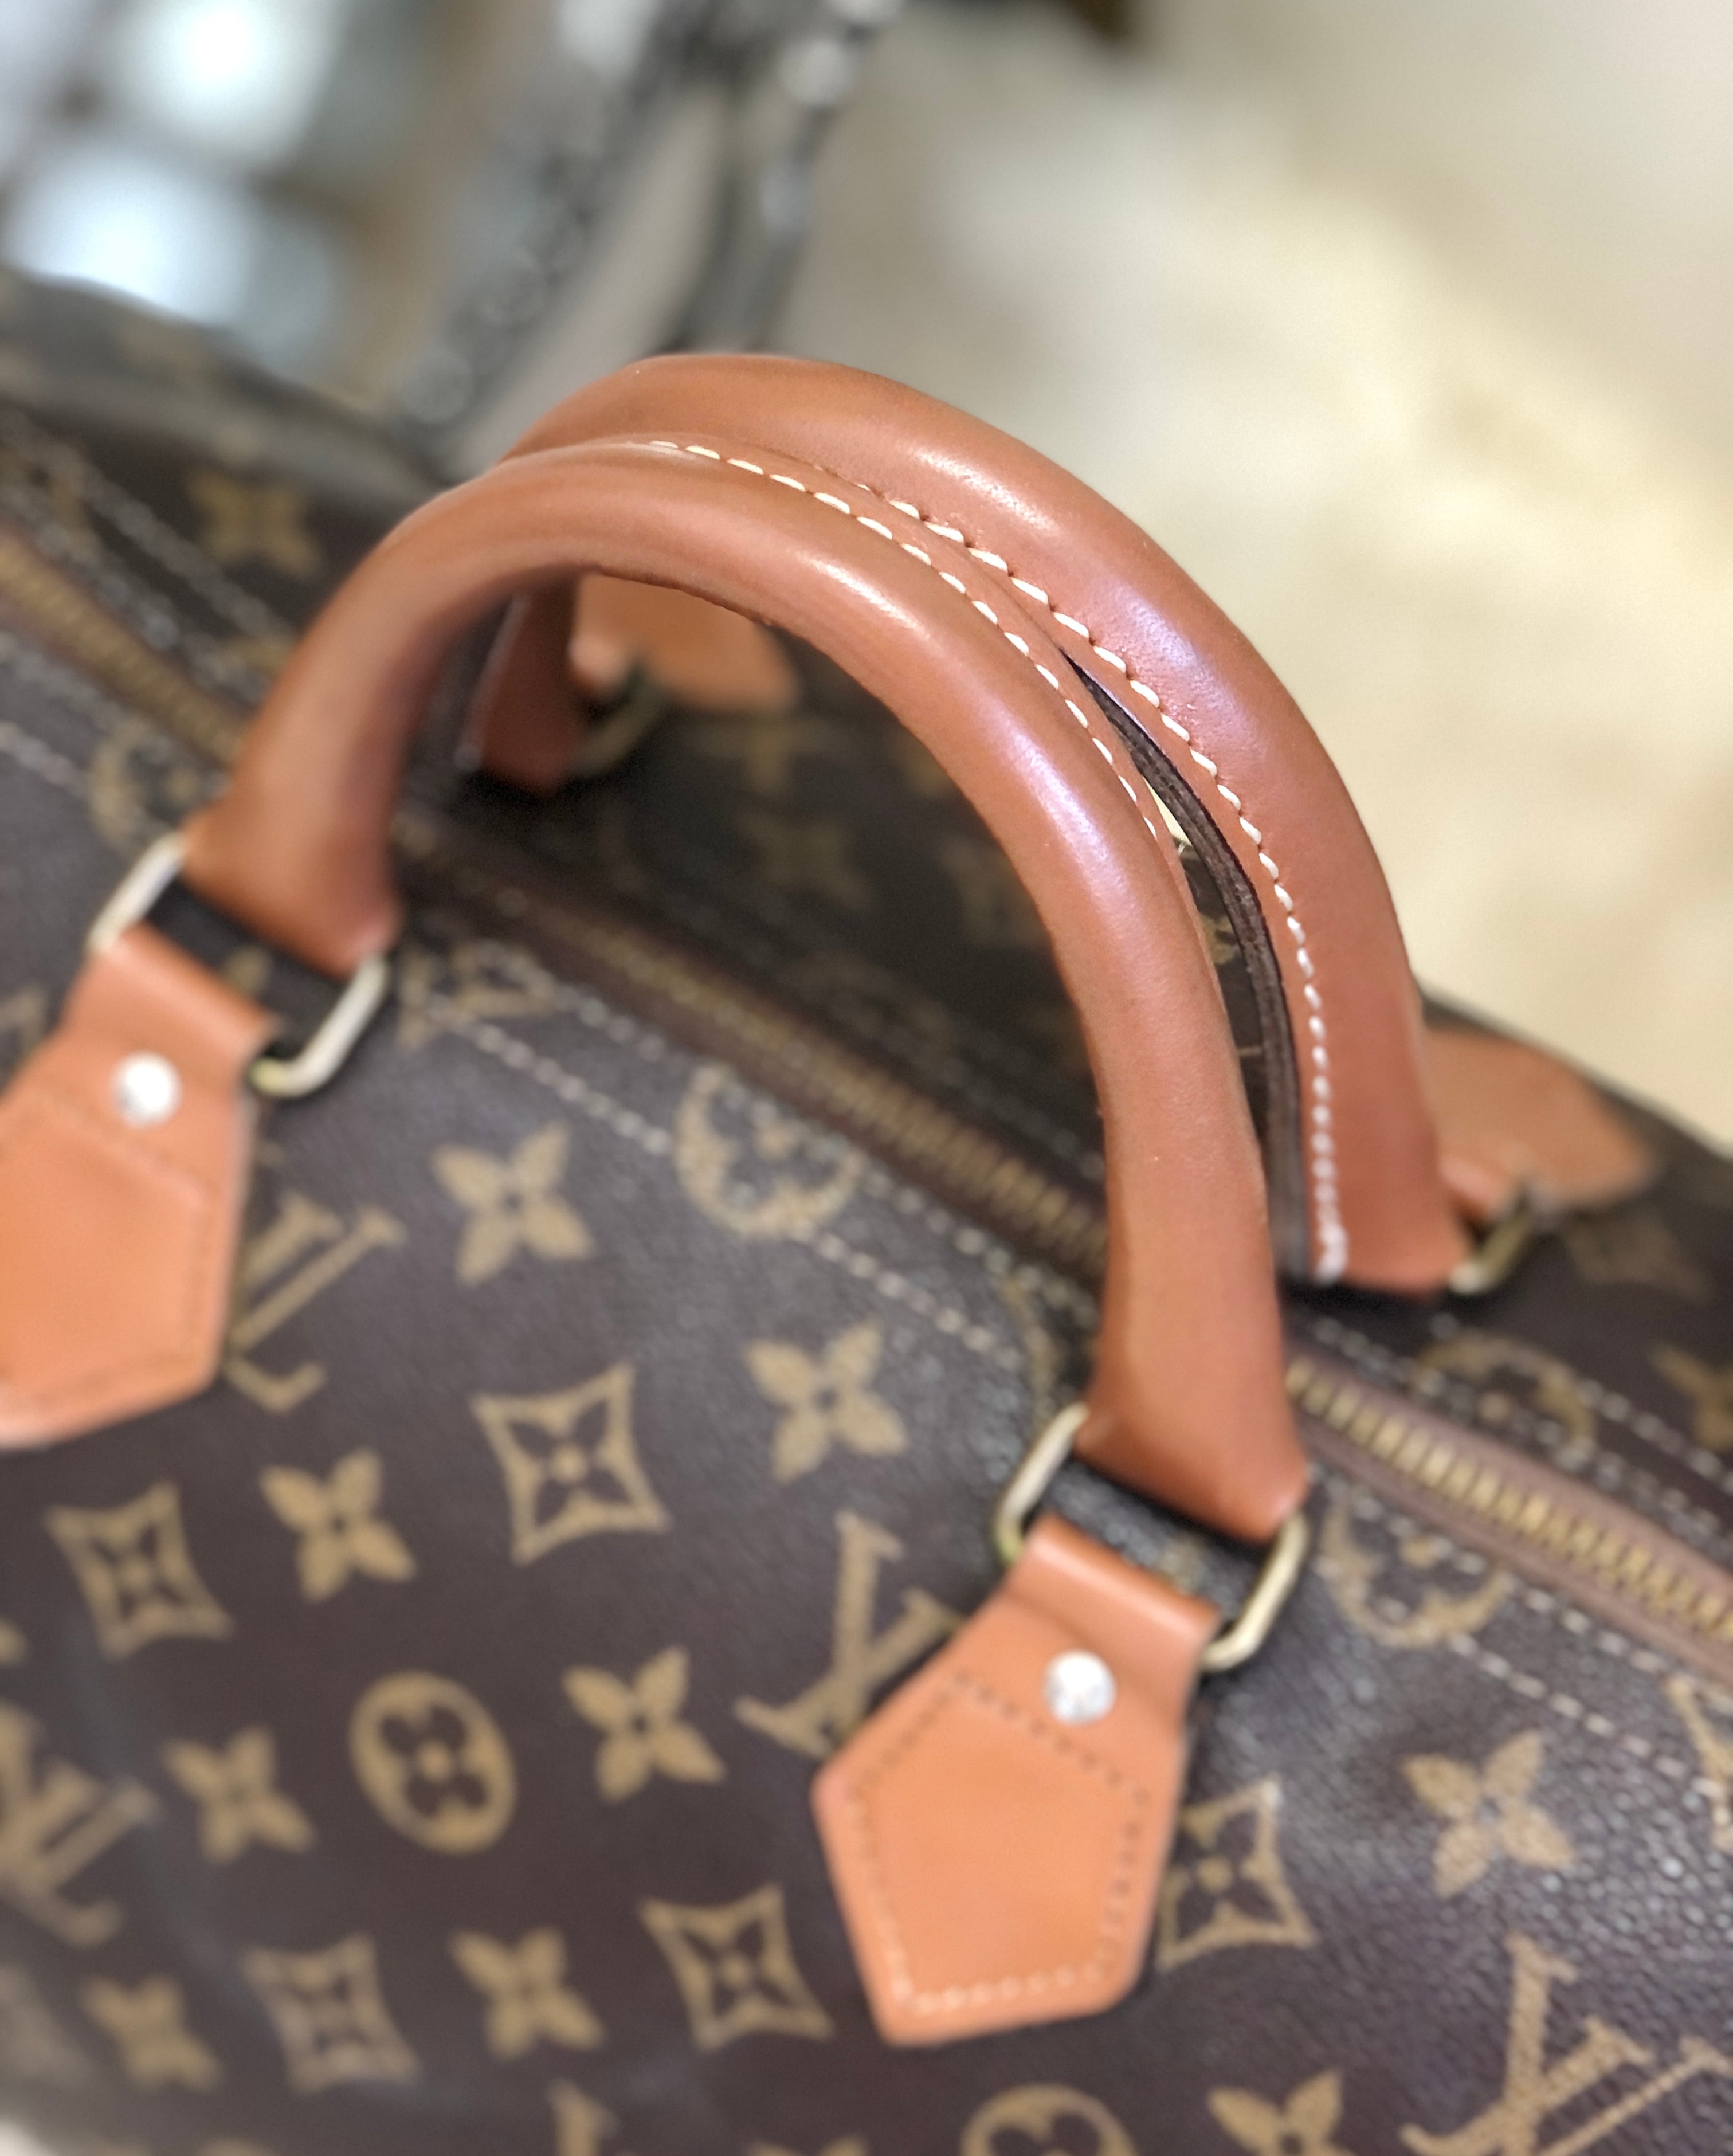 LOUIS VUITTON ルイ ヴィトン　モノグラム　北米限定　紐タグ　スピーディ 35　ボストンバッグ　ハンドバッグ　ブラウン　オールド　 ヴィンテージ　vintage　38frji | VintageShop solo powered by BASE